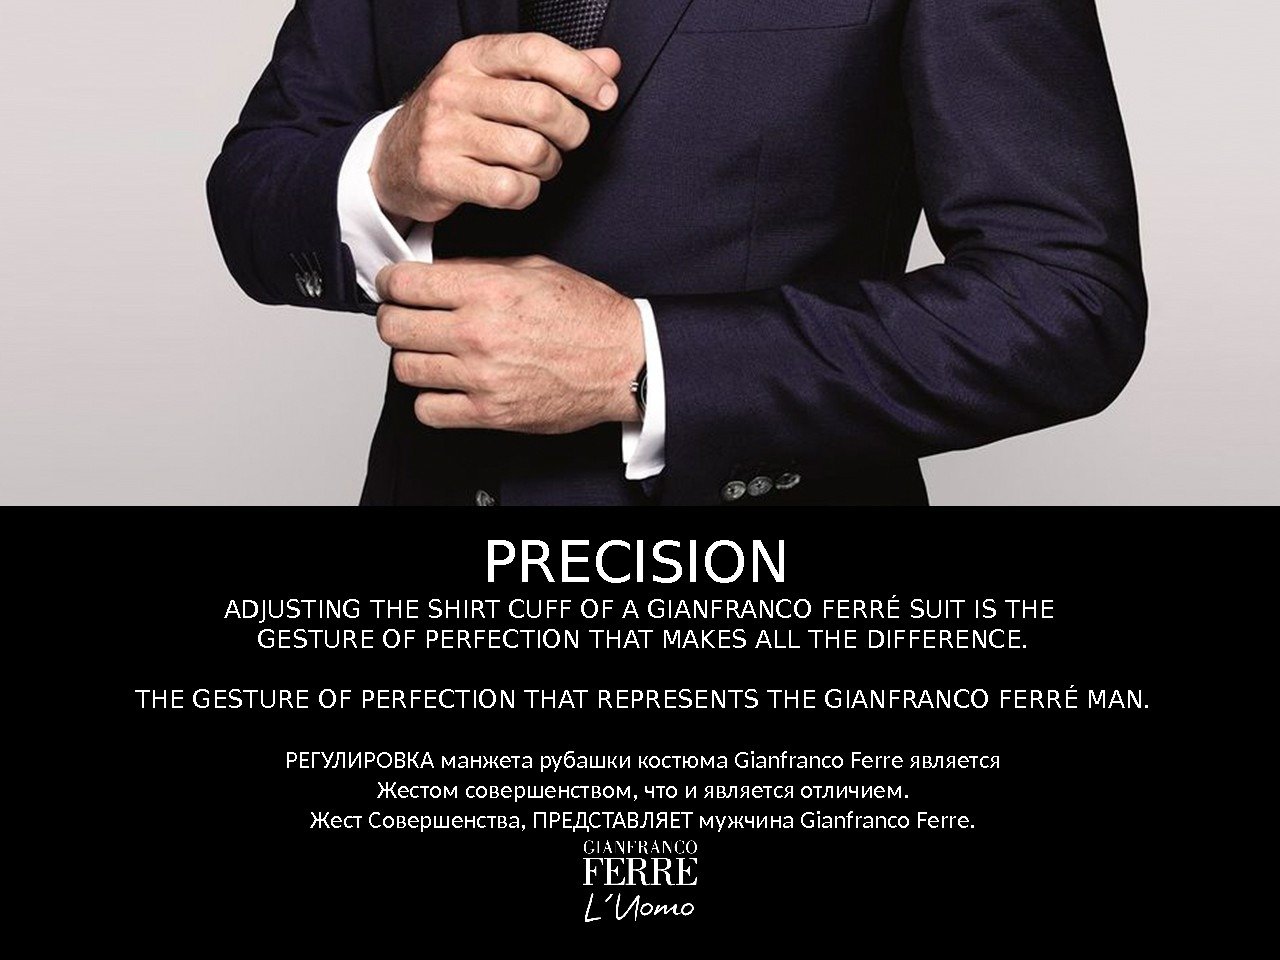 ADJUSTING THE SHIRT CUFF OF A GIANFRANCO FERRÉ SUIT IS THE GESTURE OF PERFECTION